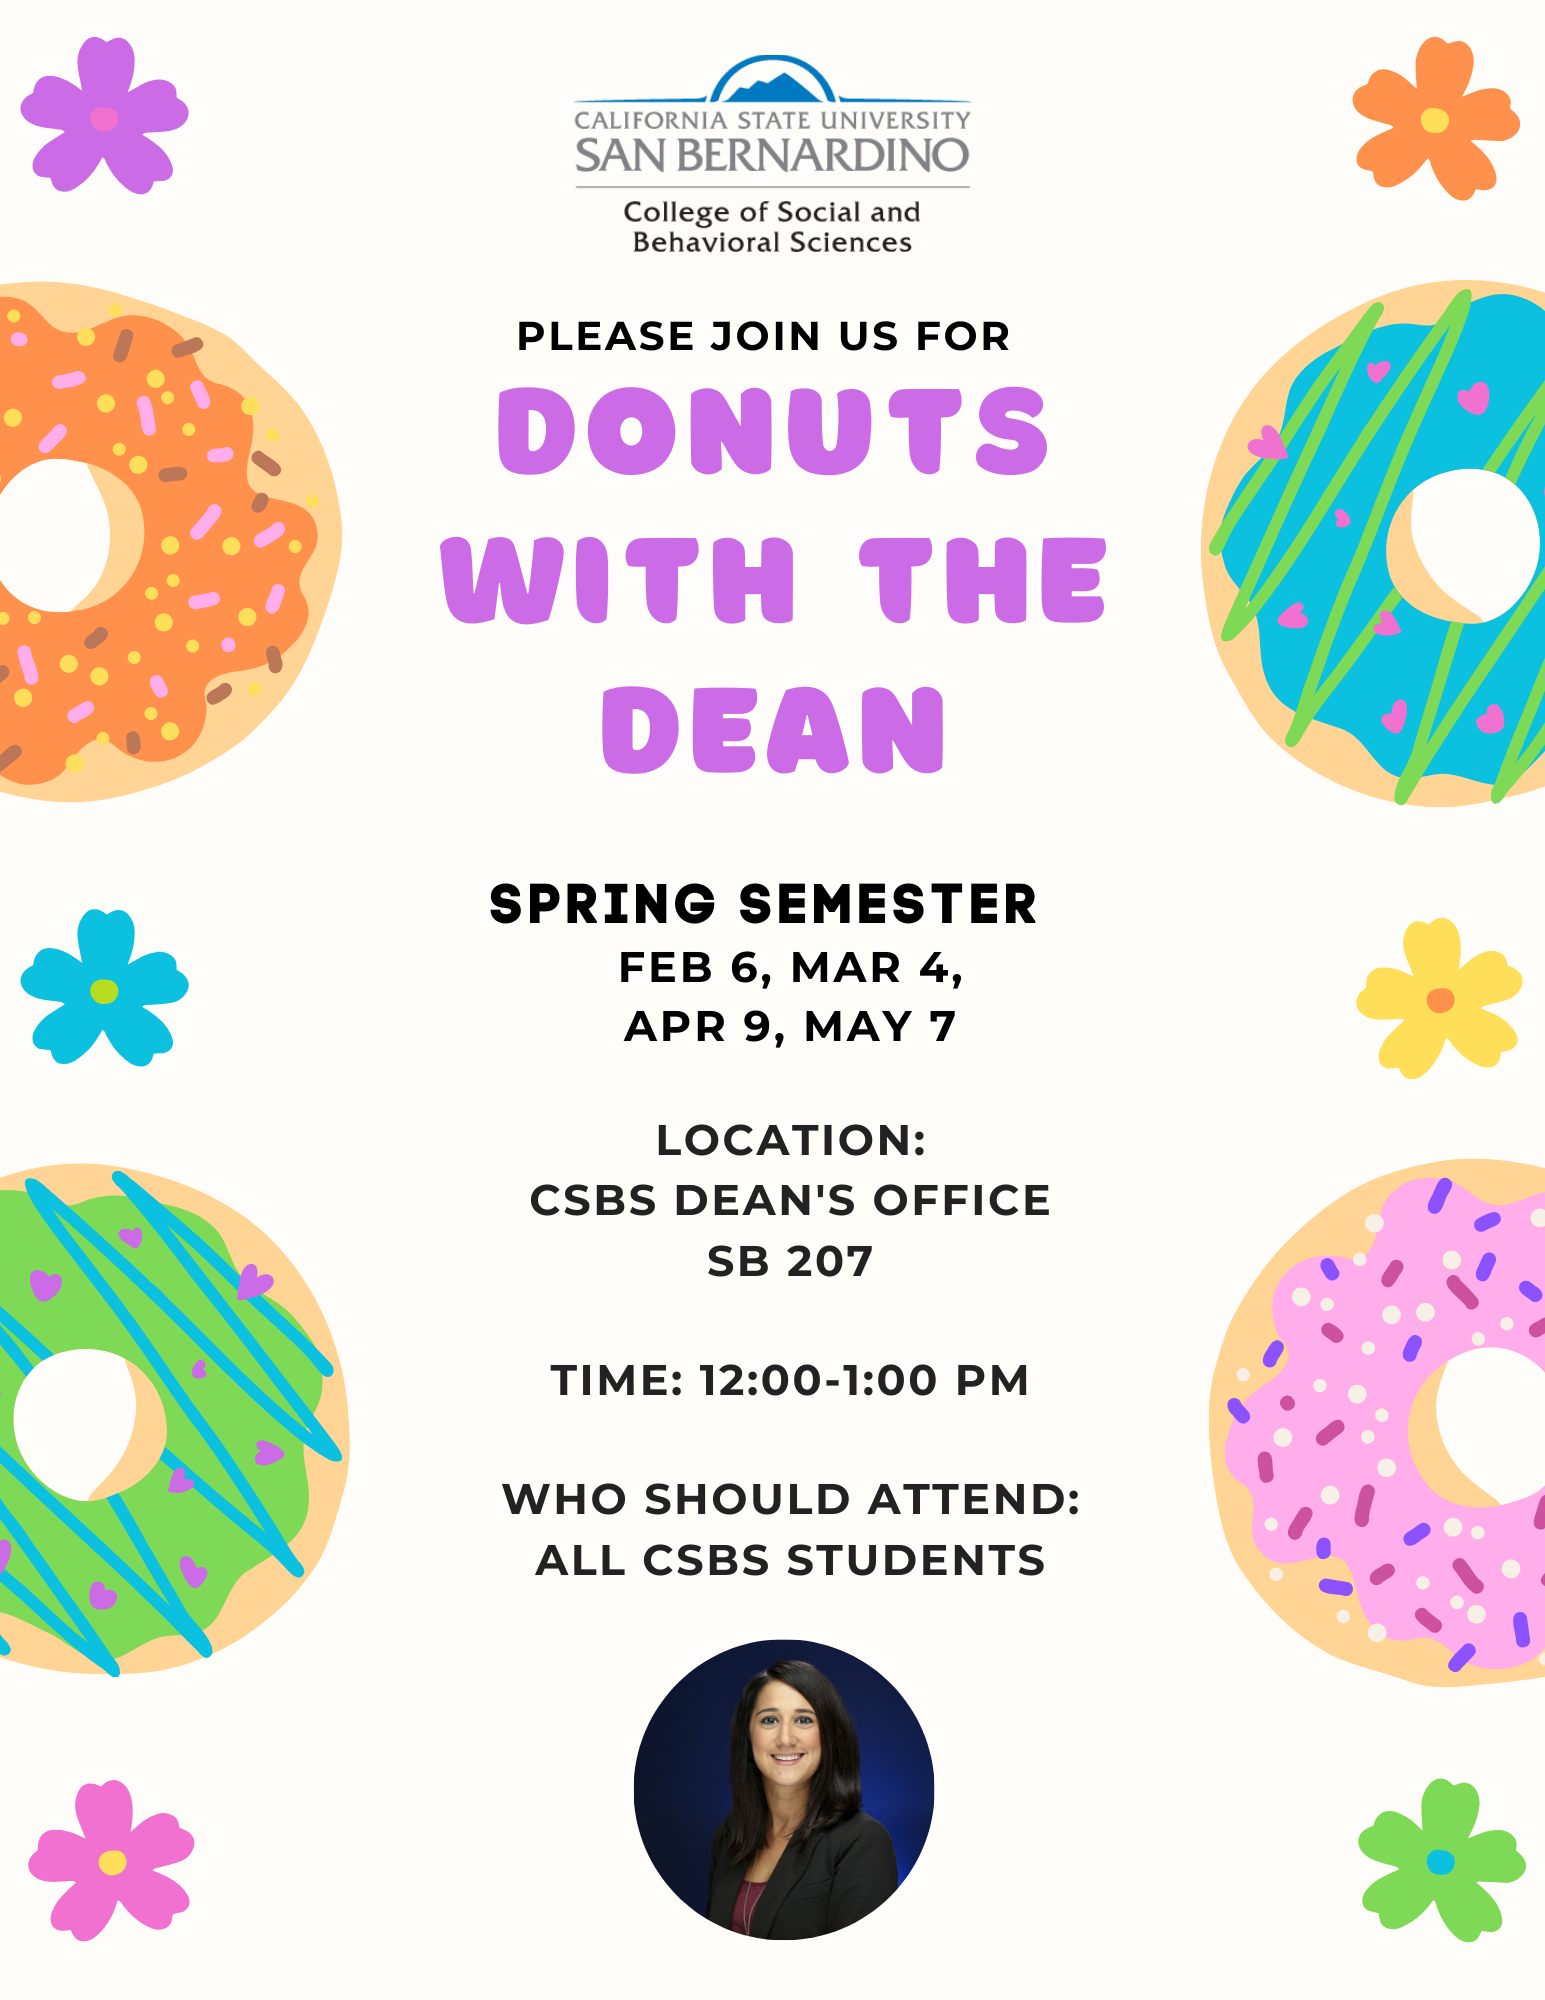 Donuts with the CSBS Dean